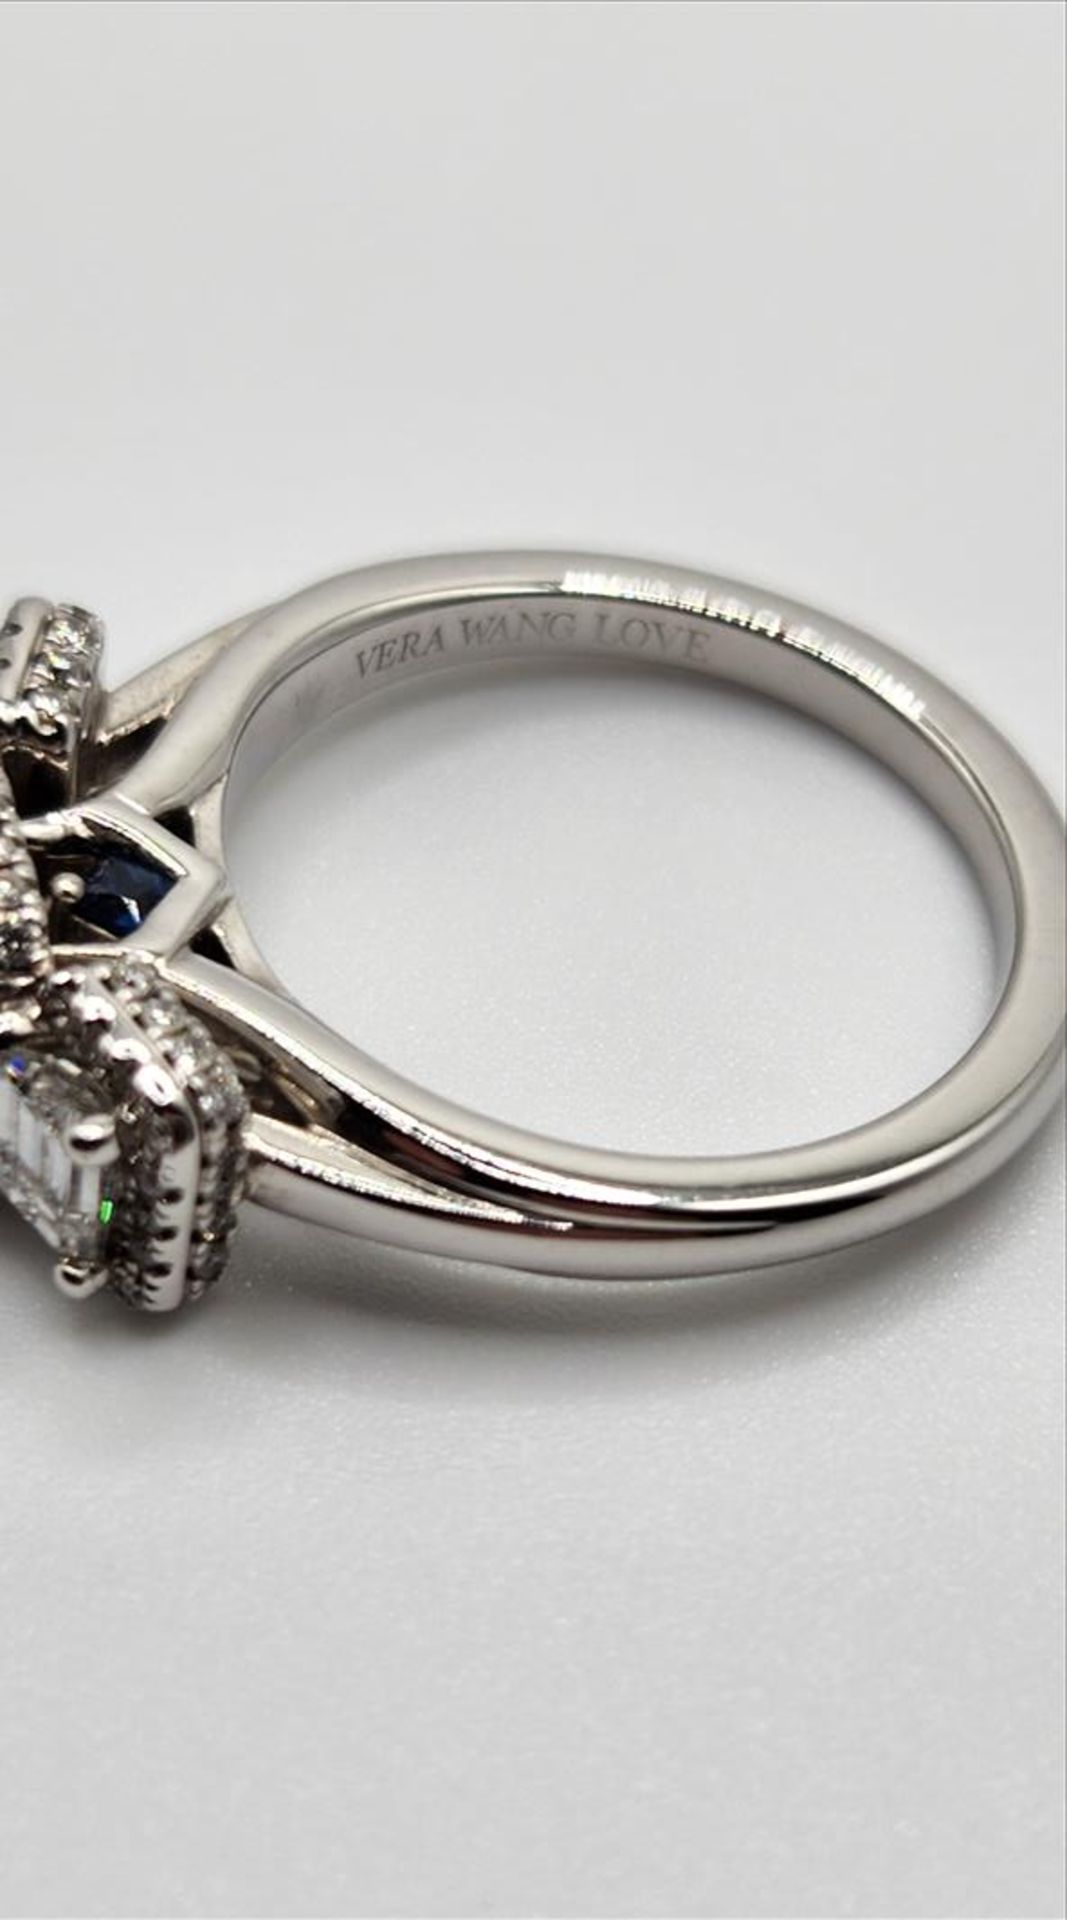 One lady’s stamped and tested 14kt VERA WANG LOVE collection diamond ring. Contained across the - Image 5 of 11